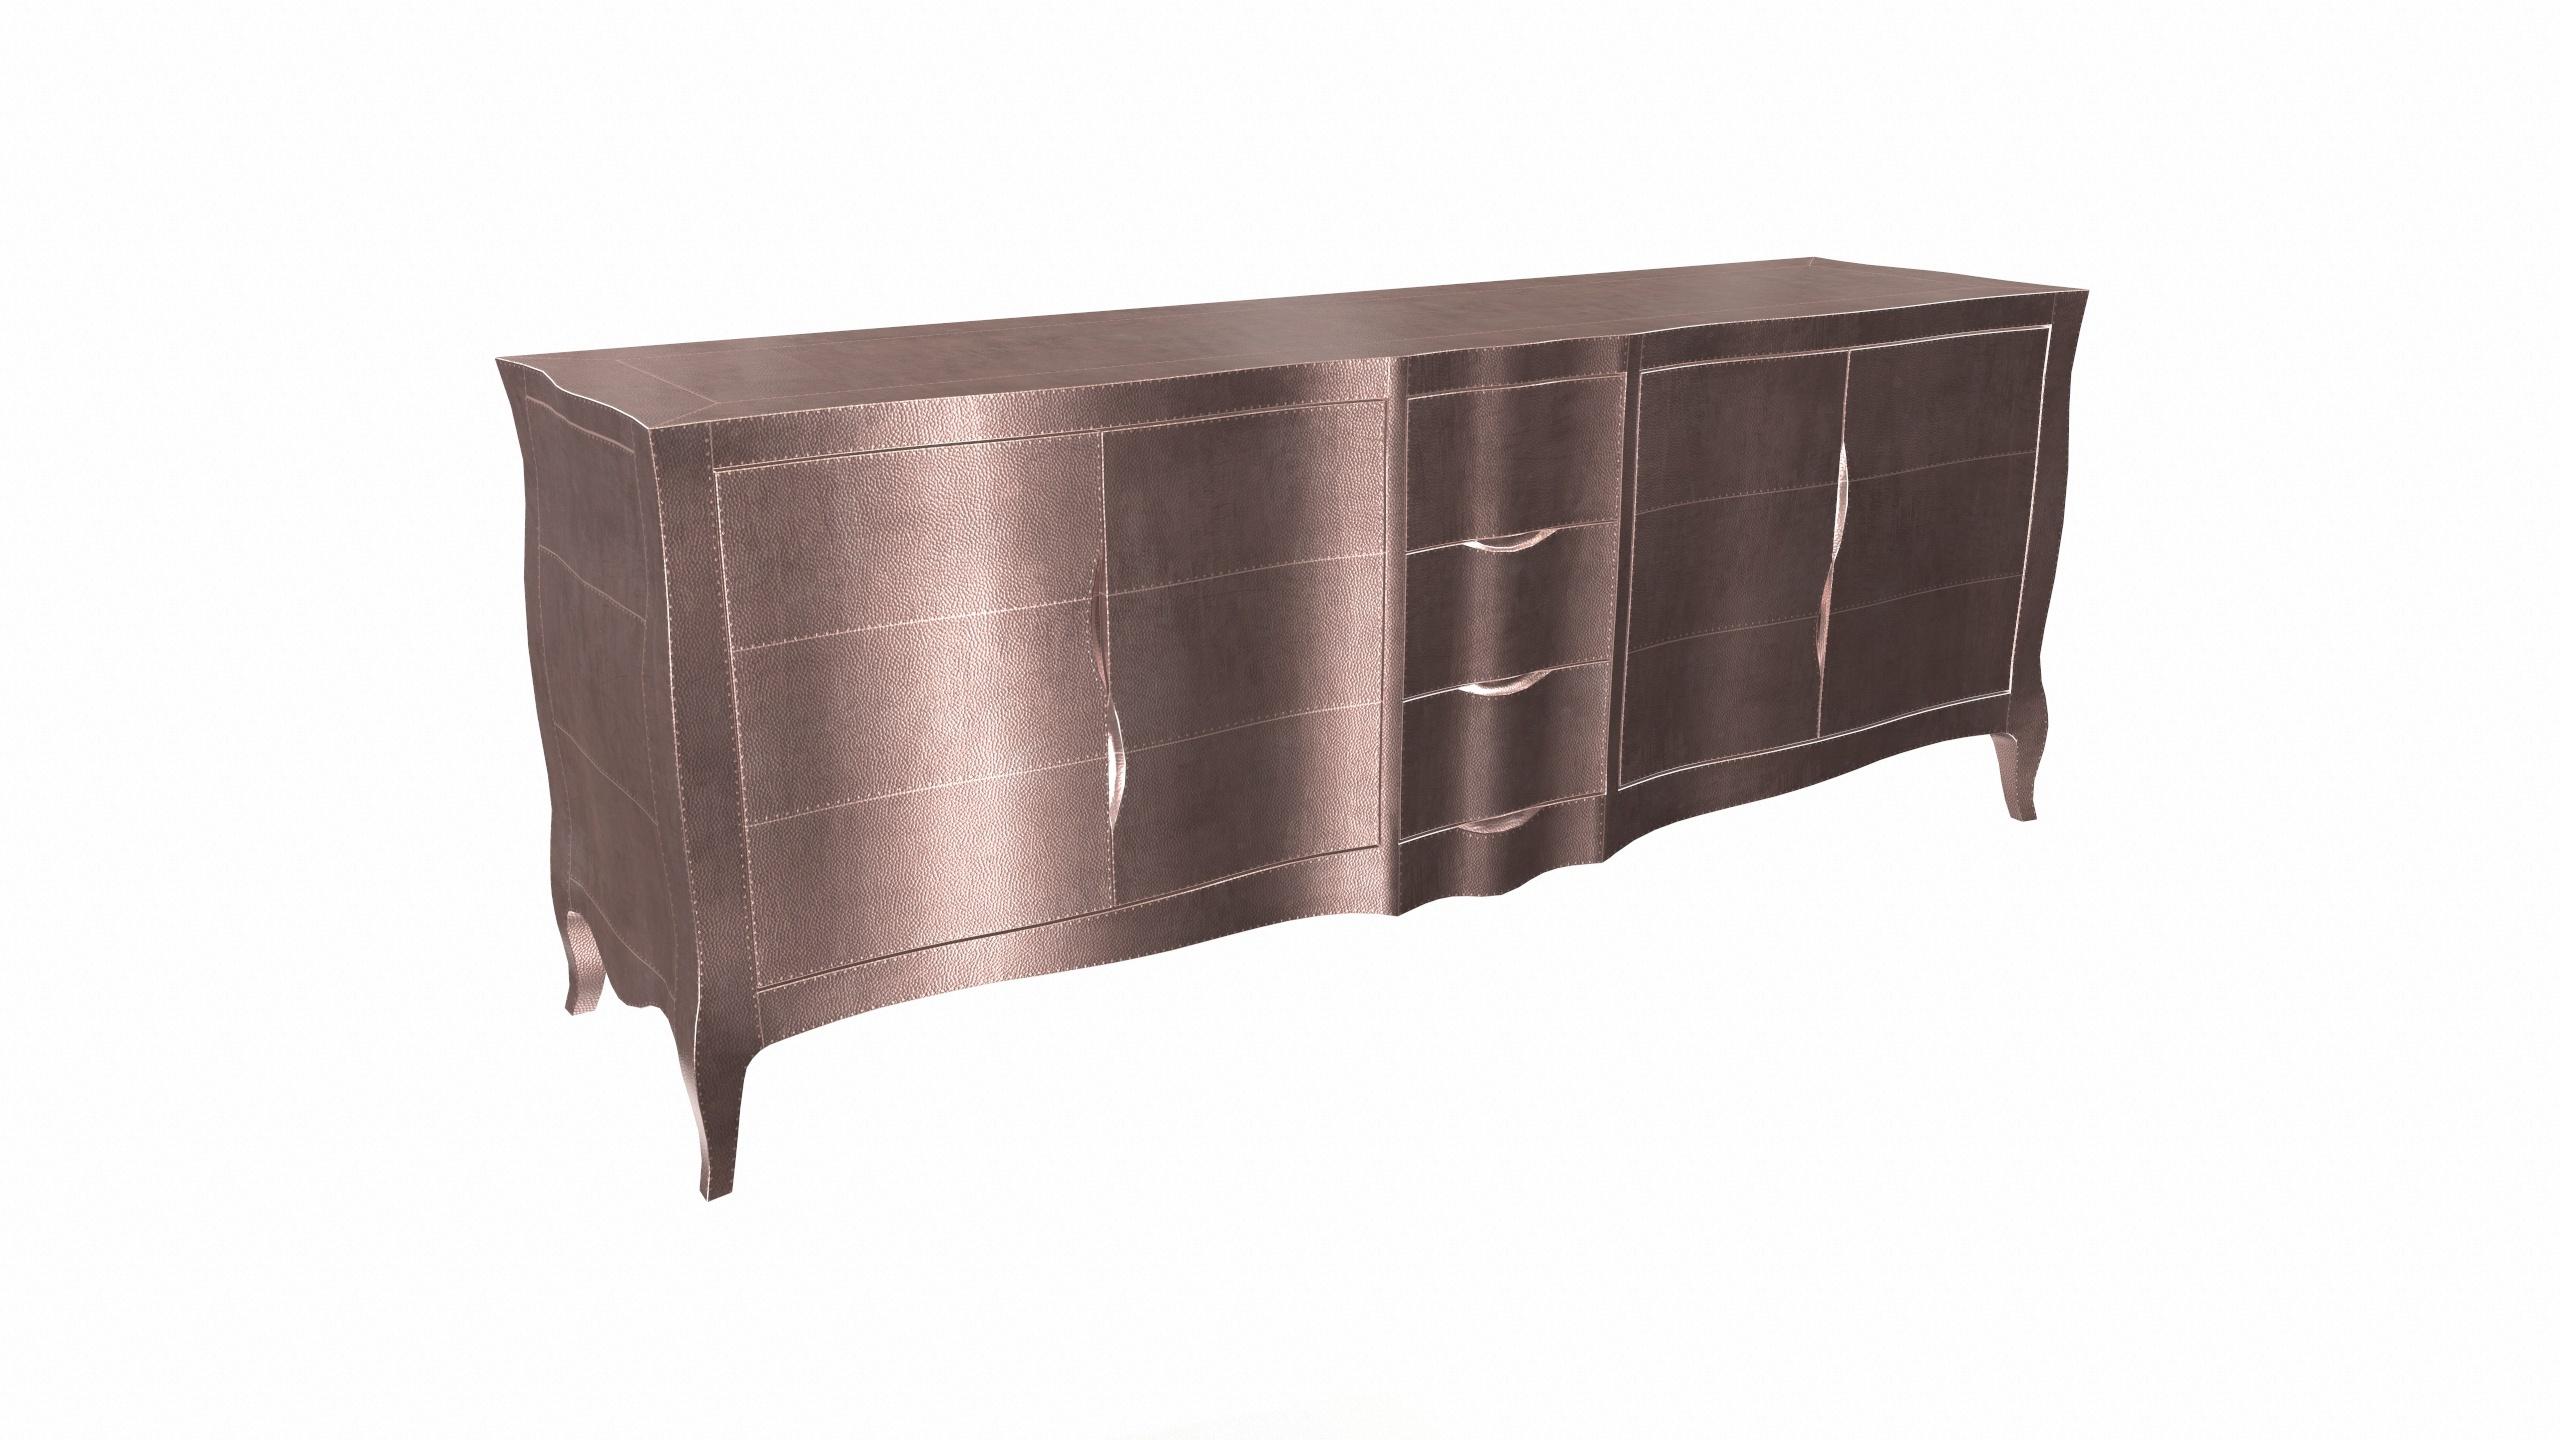 Contemporary Louise Credenza Art Deco Sideboards in Mid. Hammered Copper by Paul Mathieu For Sale